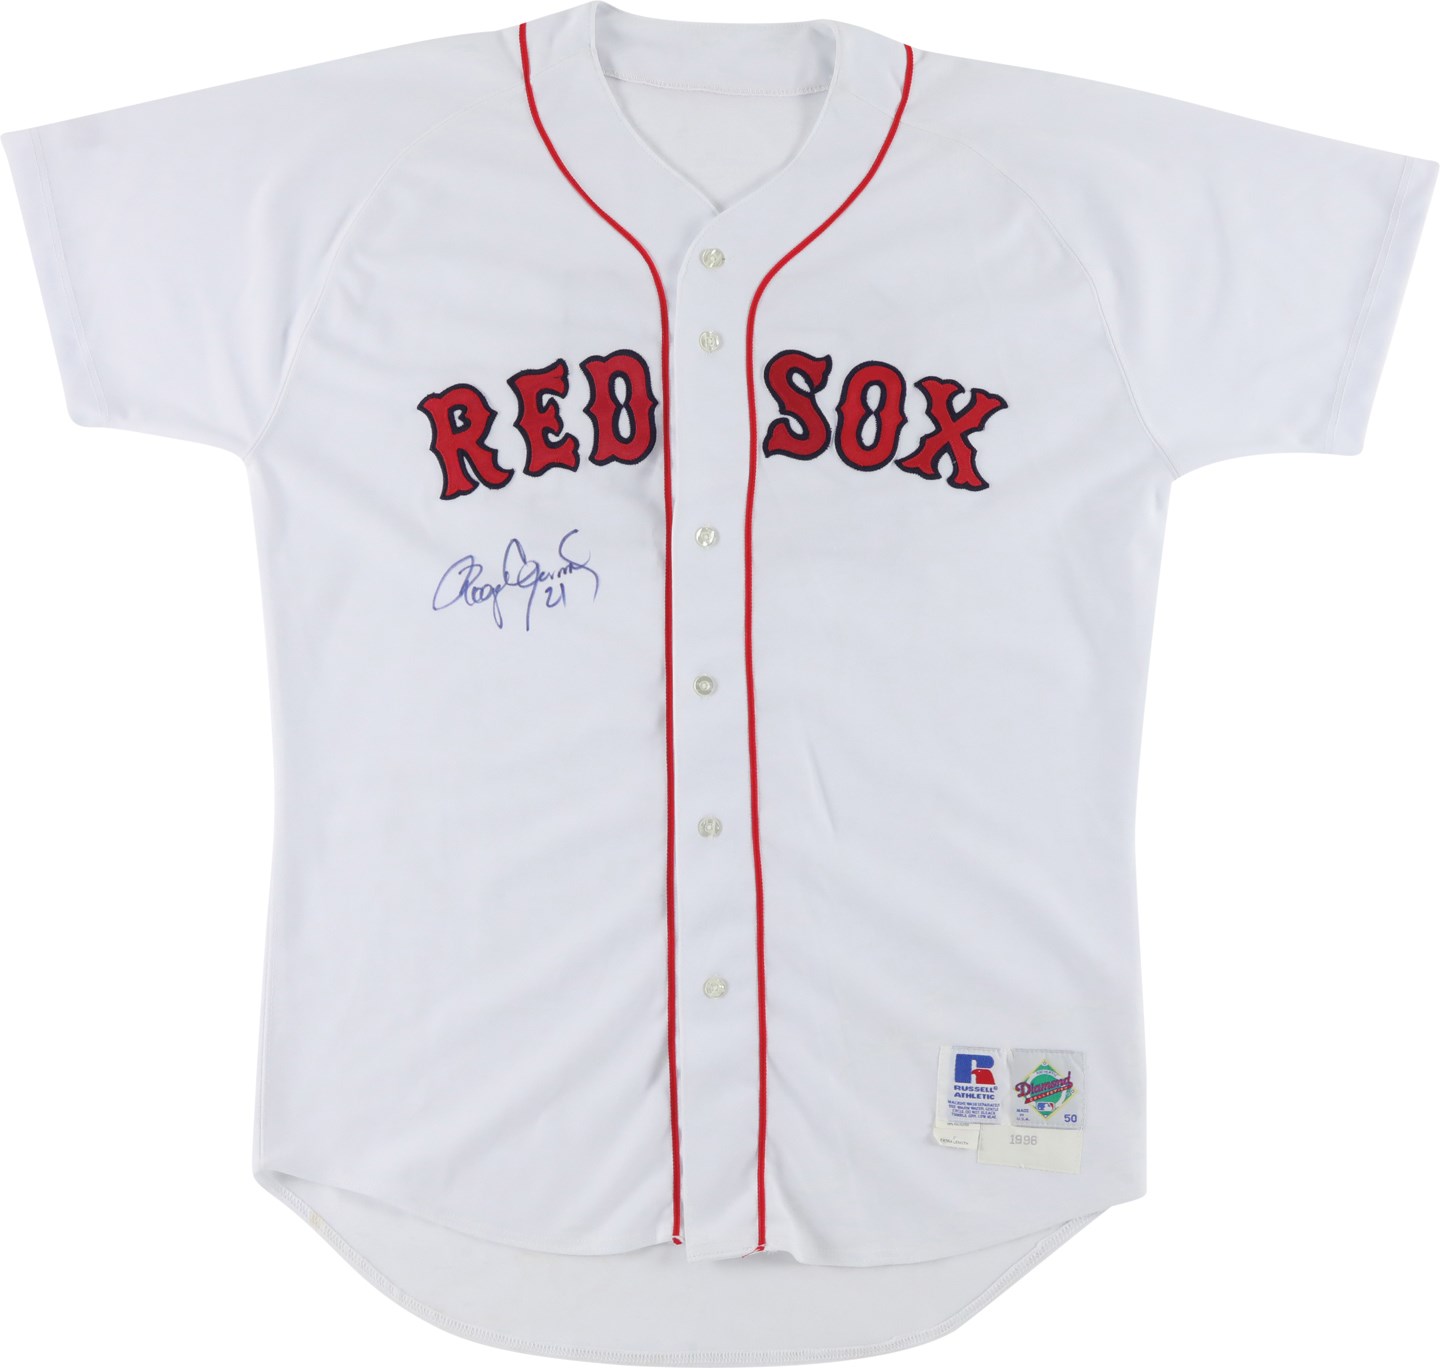 1996 Roger Clemens Boston Red Sox Signed Game Worn Jersey (PSA)